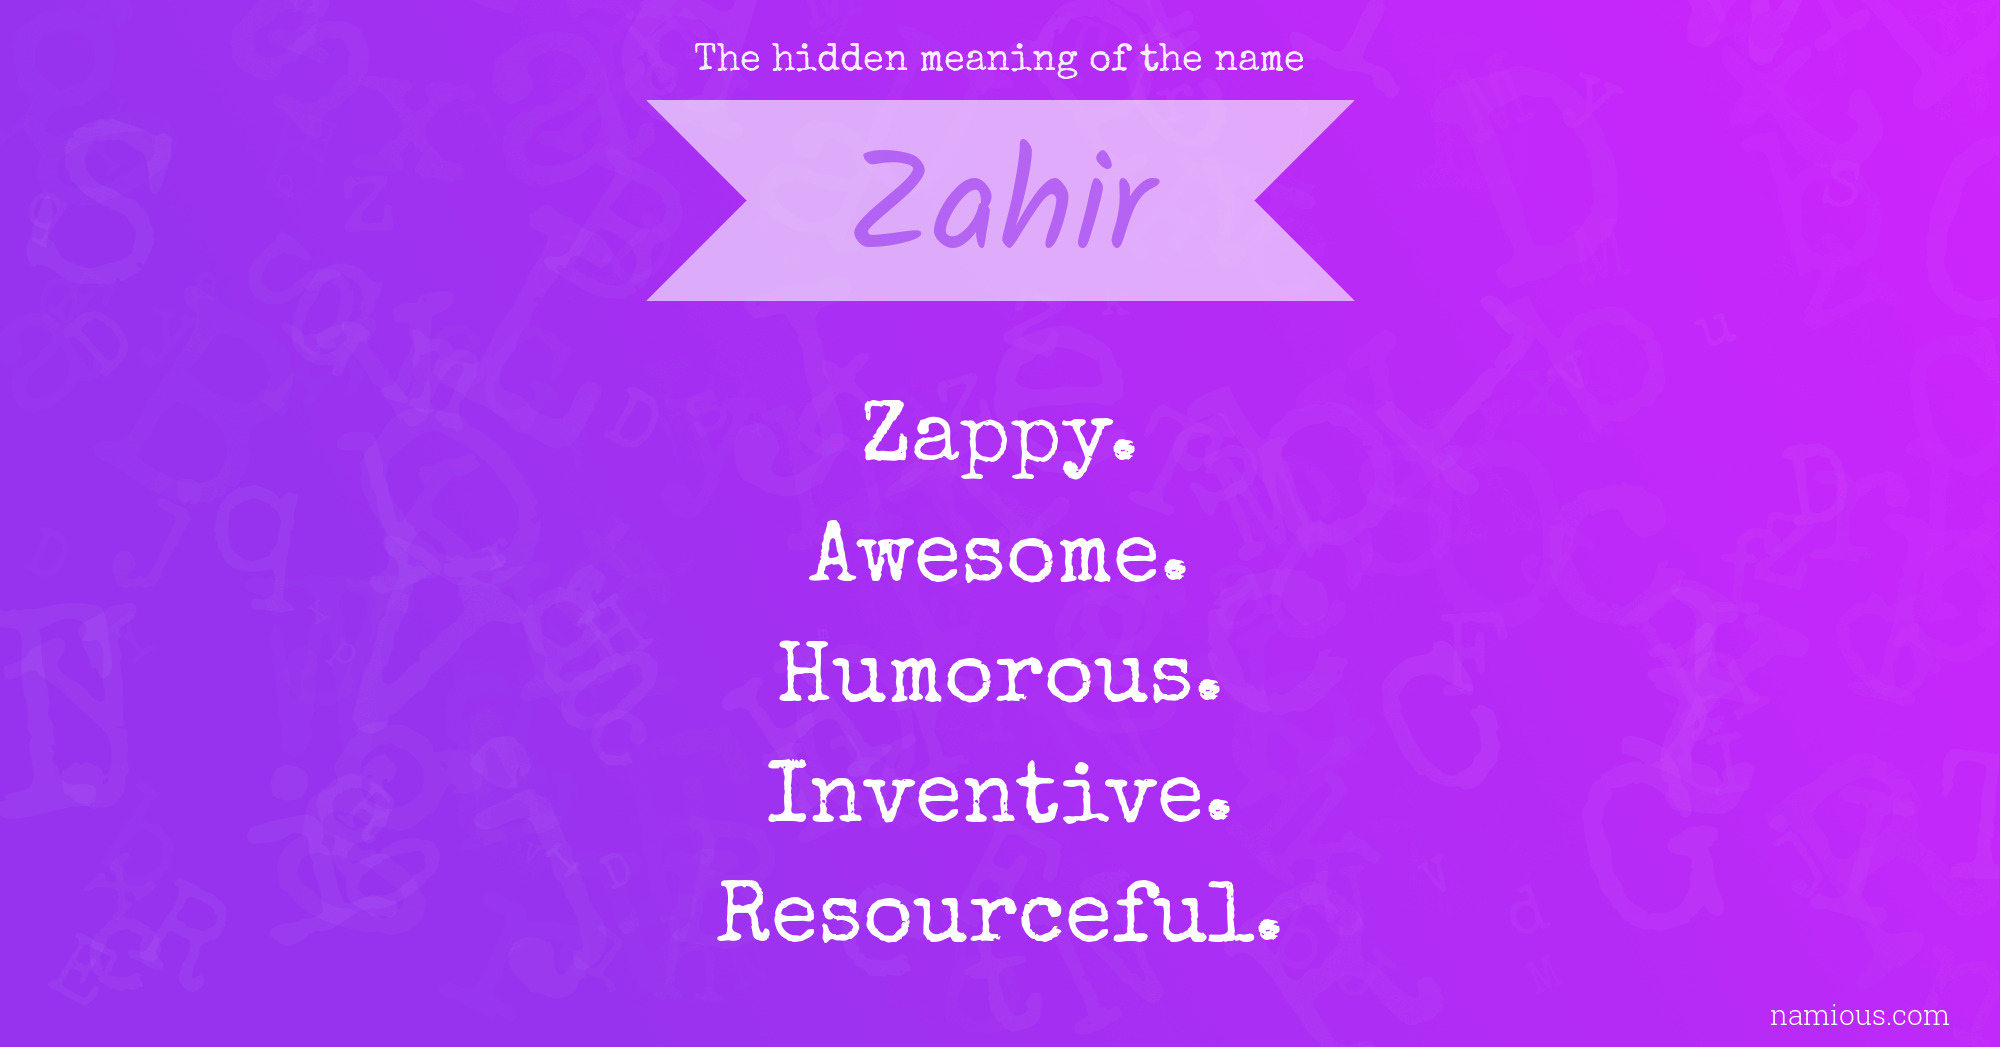 The hidden meaning of the name Zahir